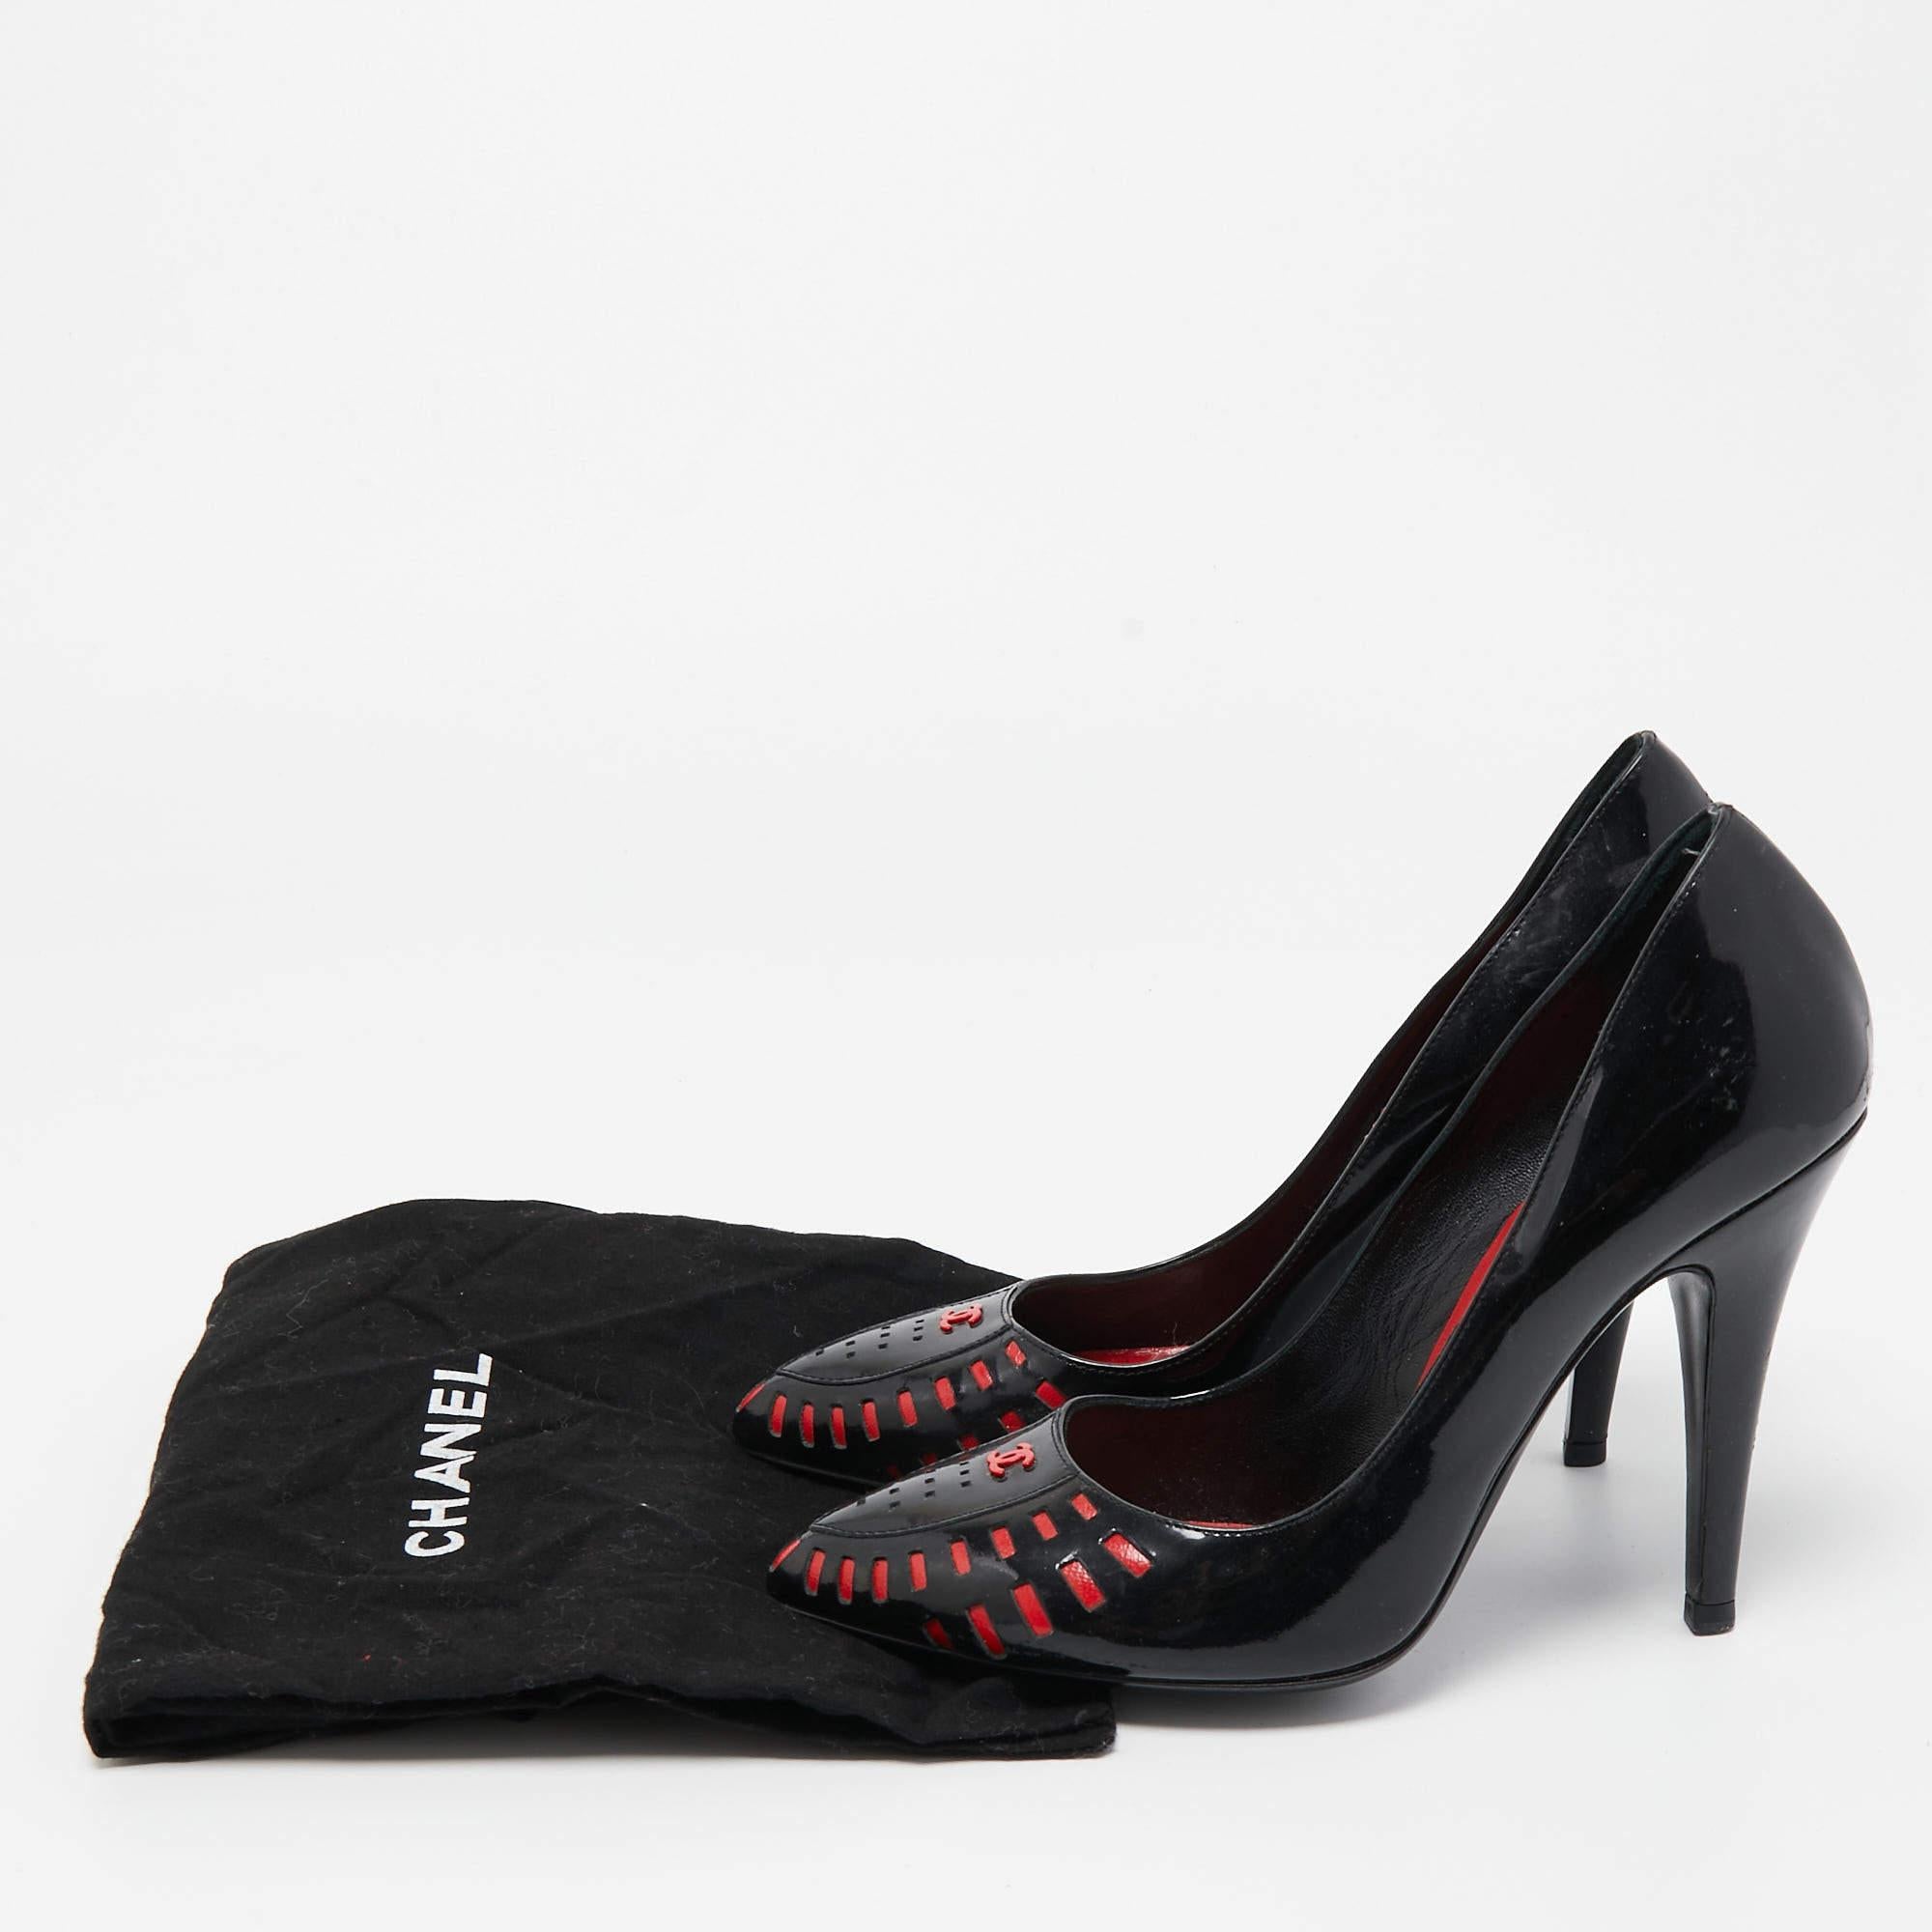 Chanel Black/Red Patent Pointed Toe Pumps Size 38 5